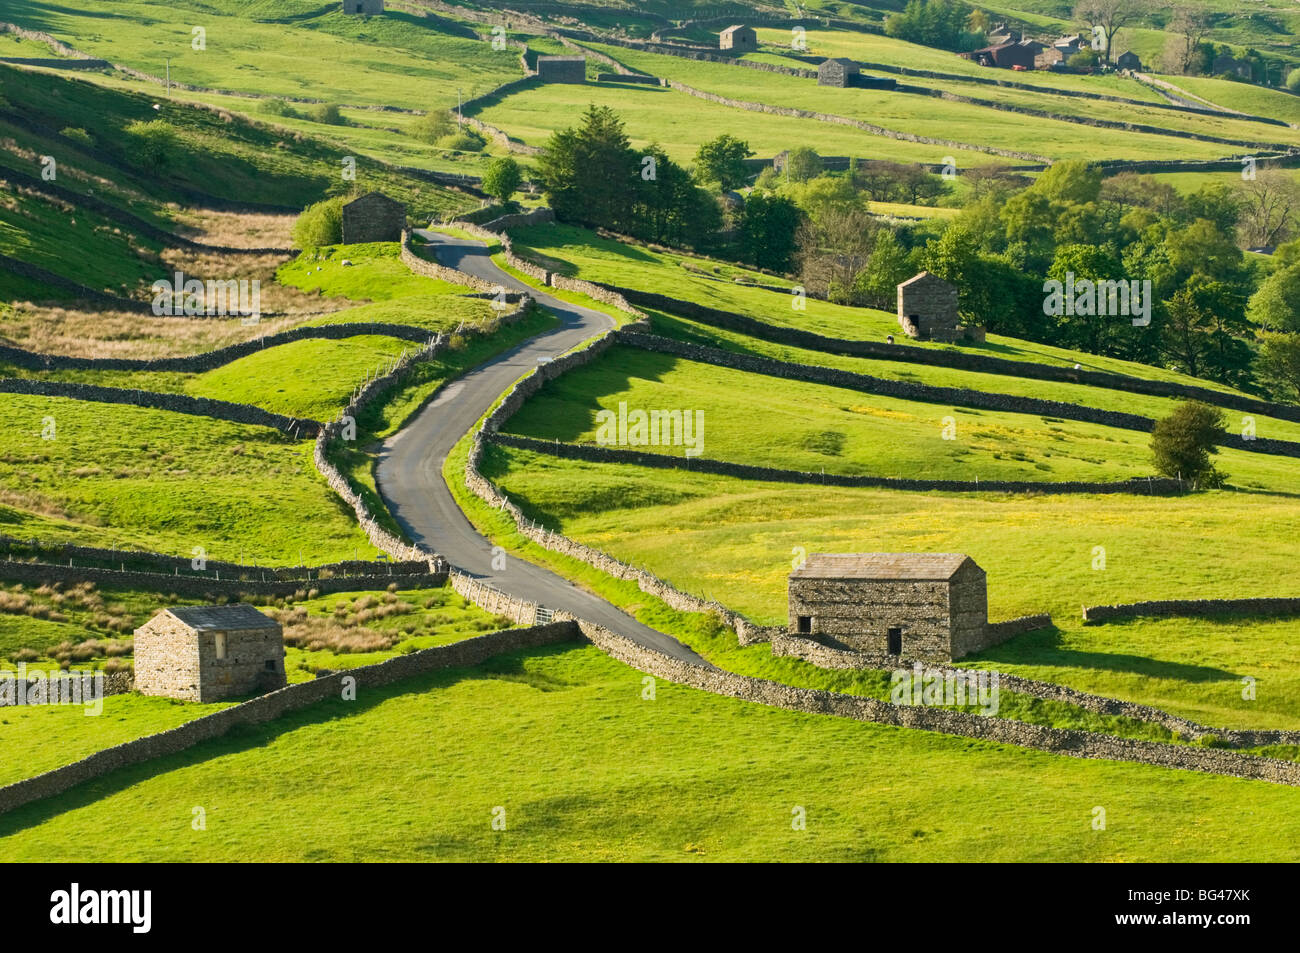 View of traditional stone barns and walls near Thwaite in Swaledale, Yorkshire, England, United Kingdom, Europe Stock Photo